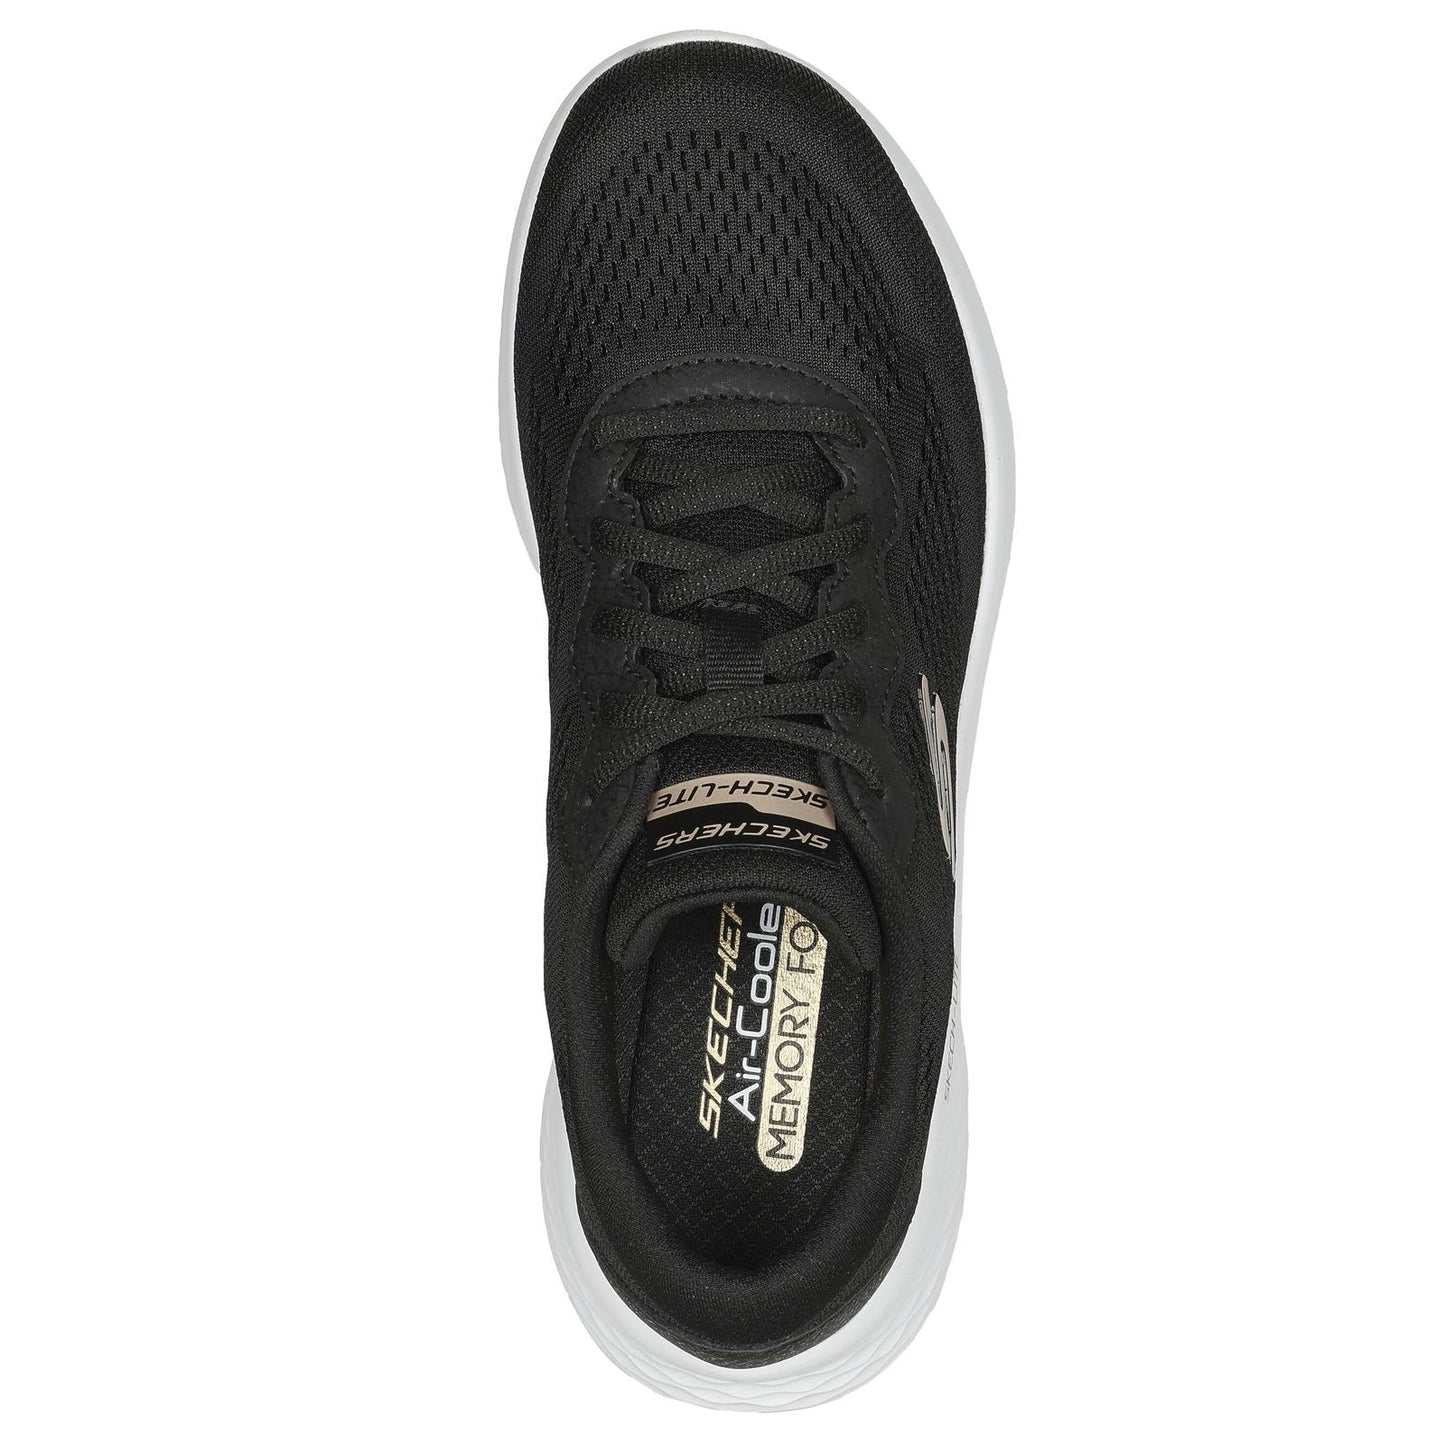 Skechers Skechlite Pro Perfect Time Black Rose Gold Vegan Trainers Shoes